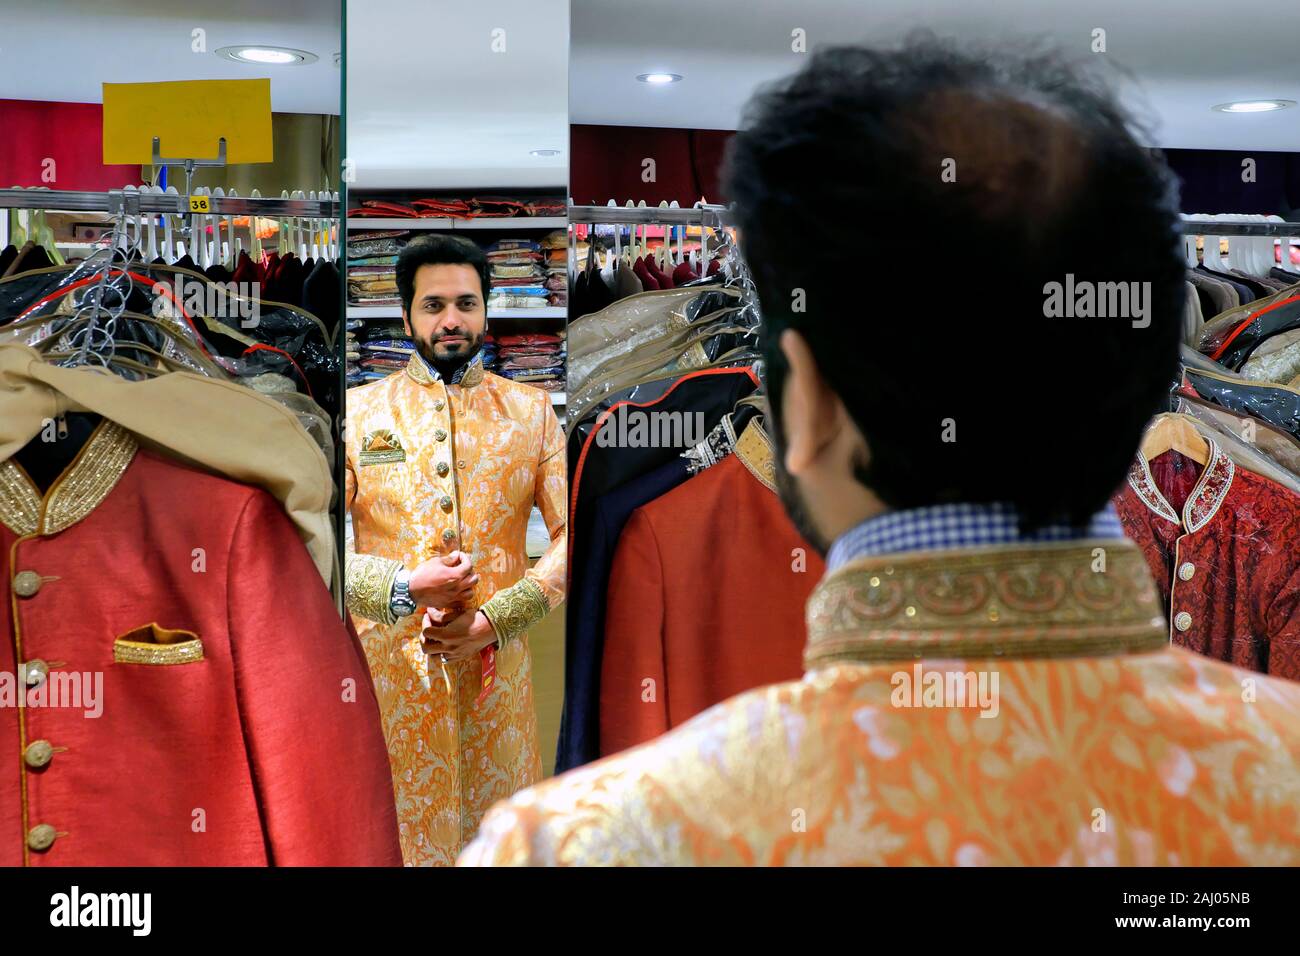 Trying out a colourful sherwani suit, Saree Mandir shop, Belgrave Road, Leicester, Leicestershire, England, UK, Europe Stock Photo